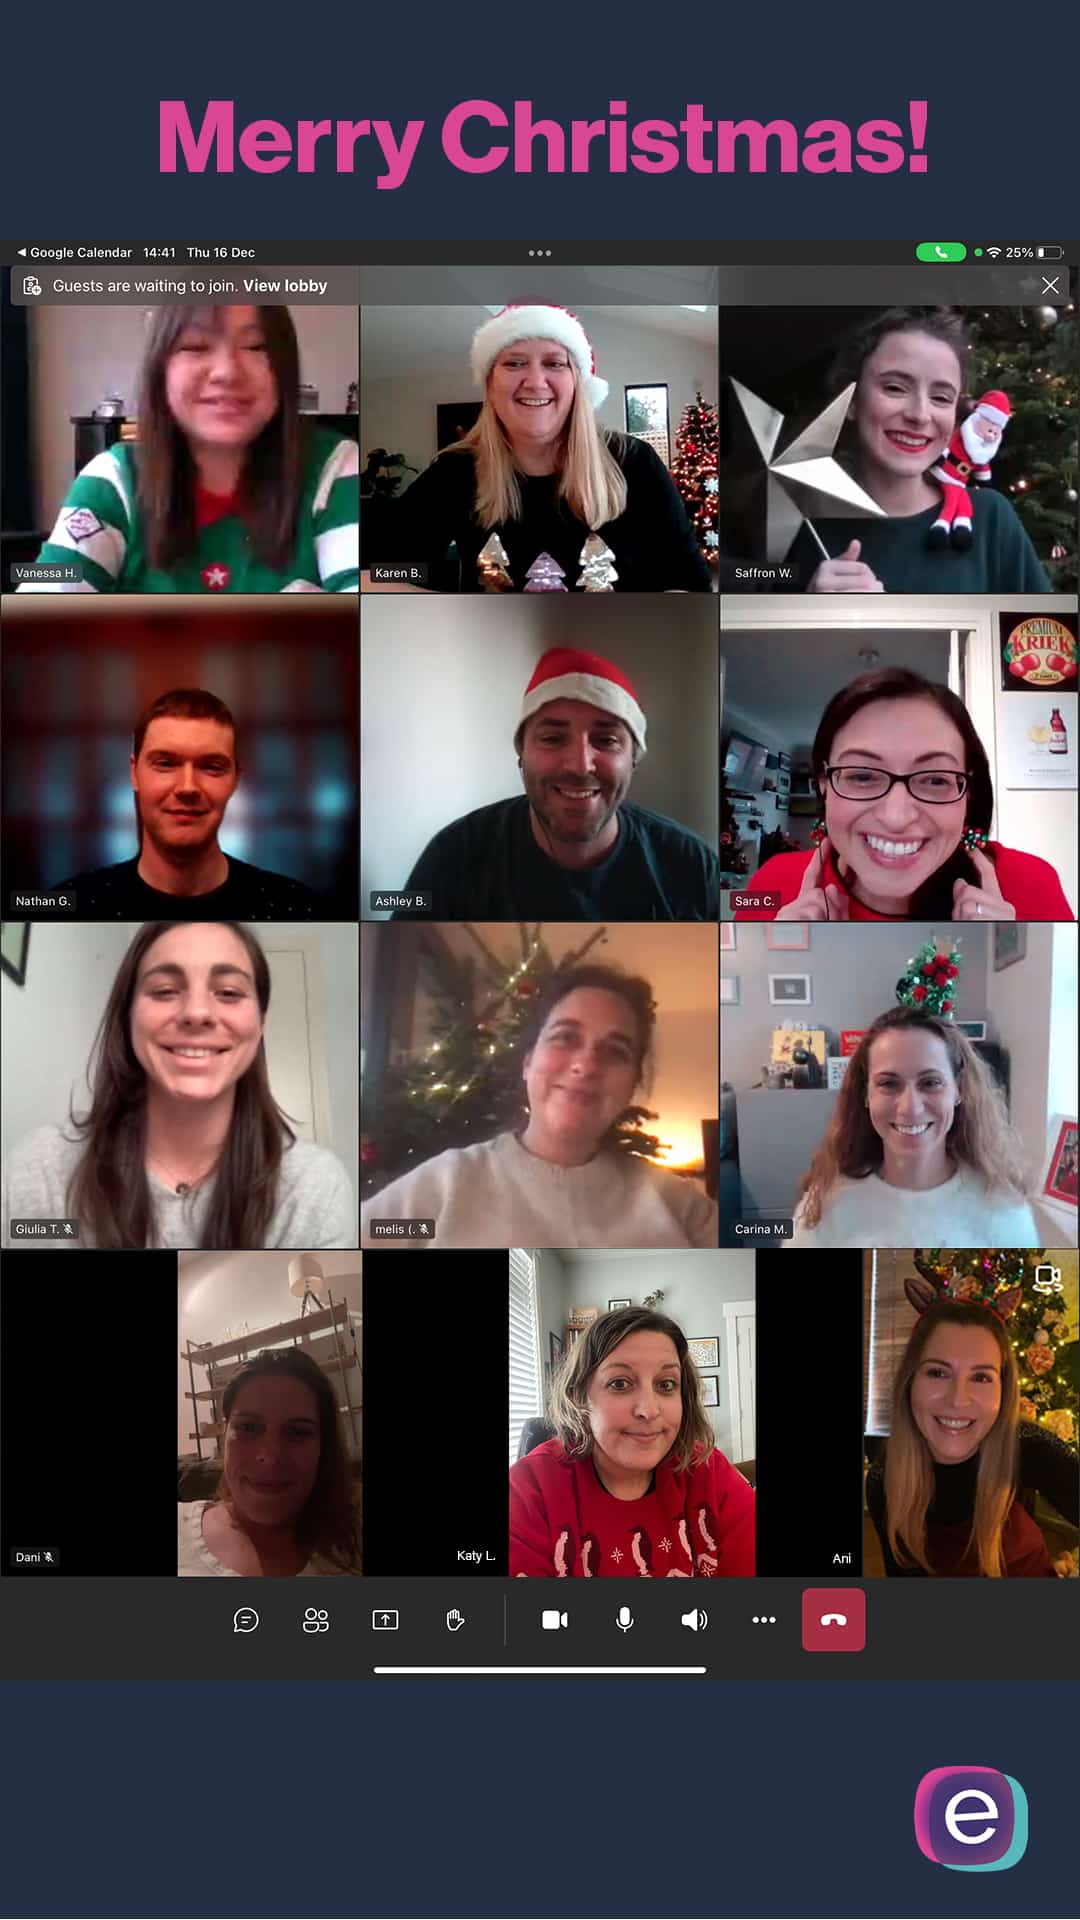 Merry Christmas from the eCommerce Nurse team!